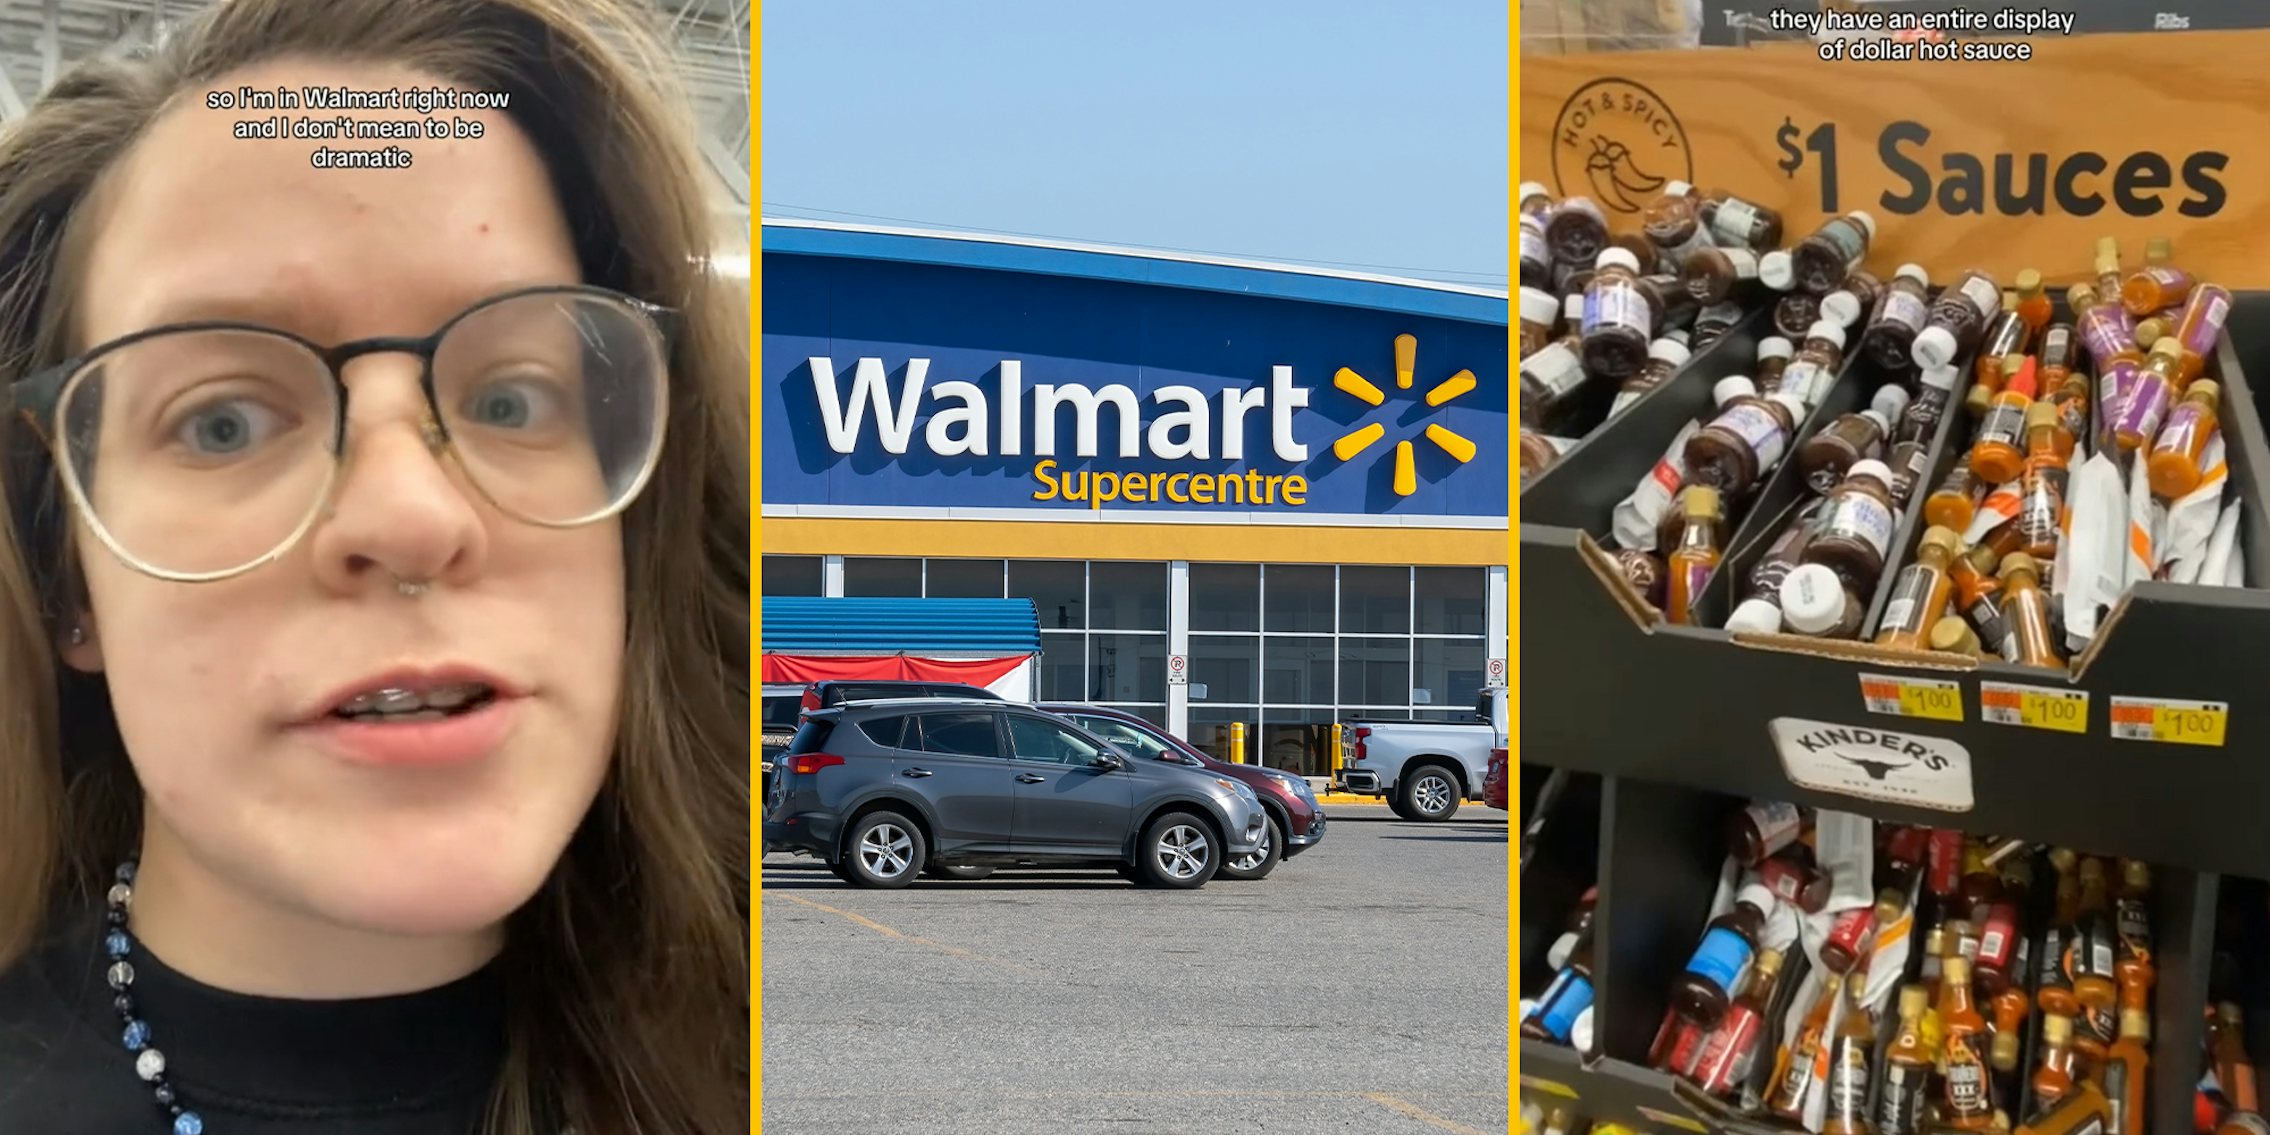 Walmart customer shows you can now buy purse hot sauces for $1